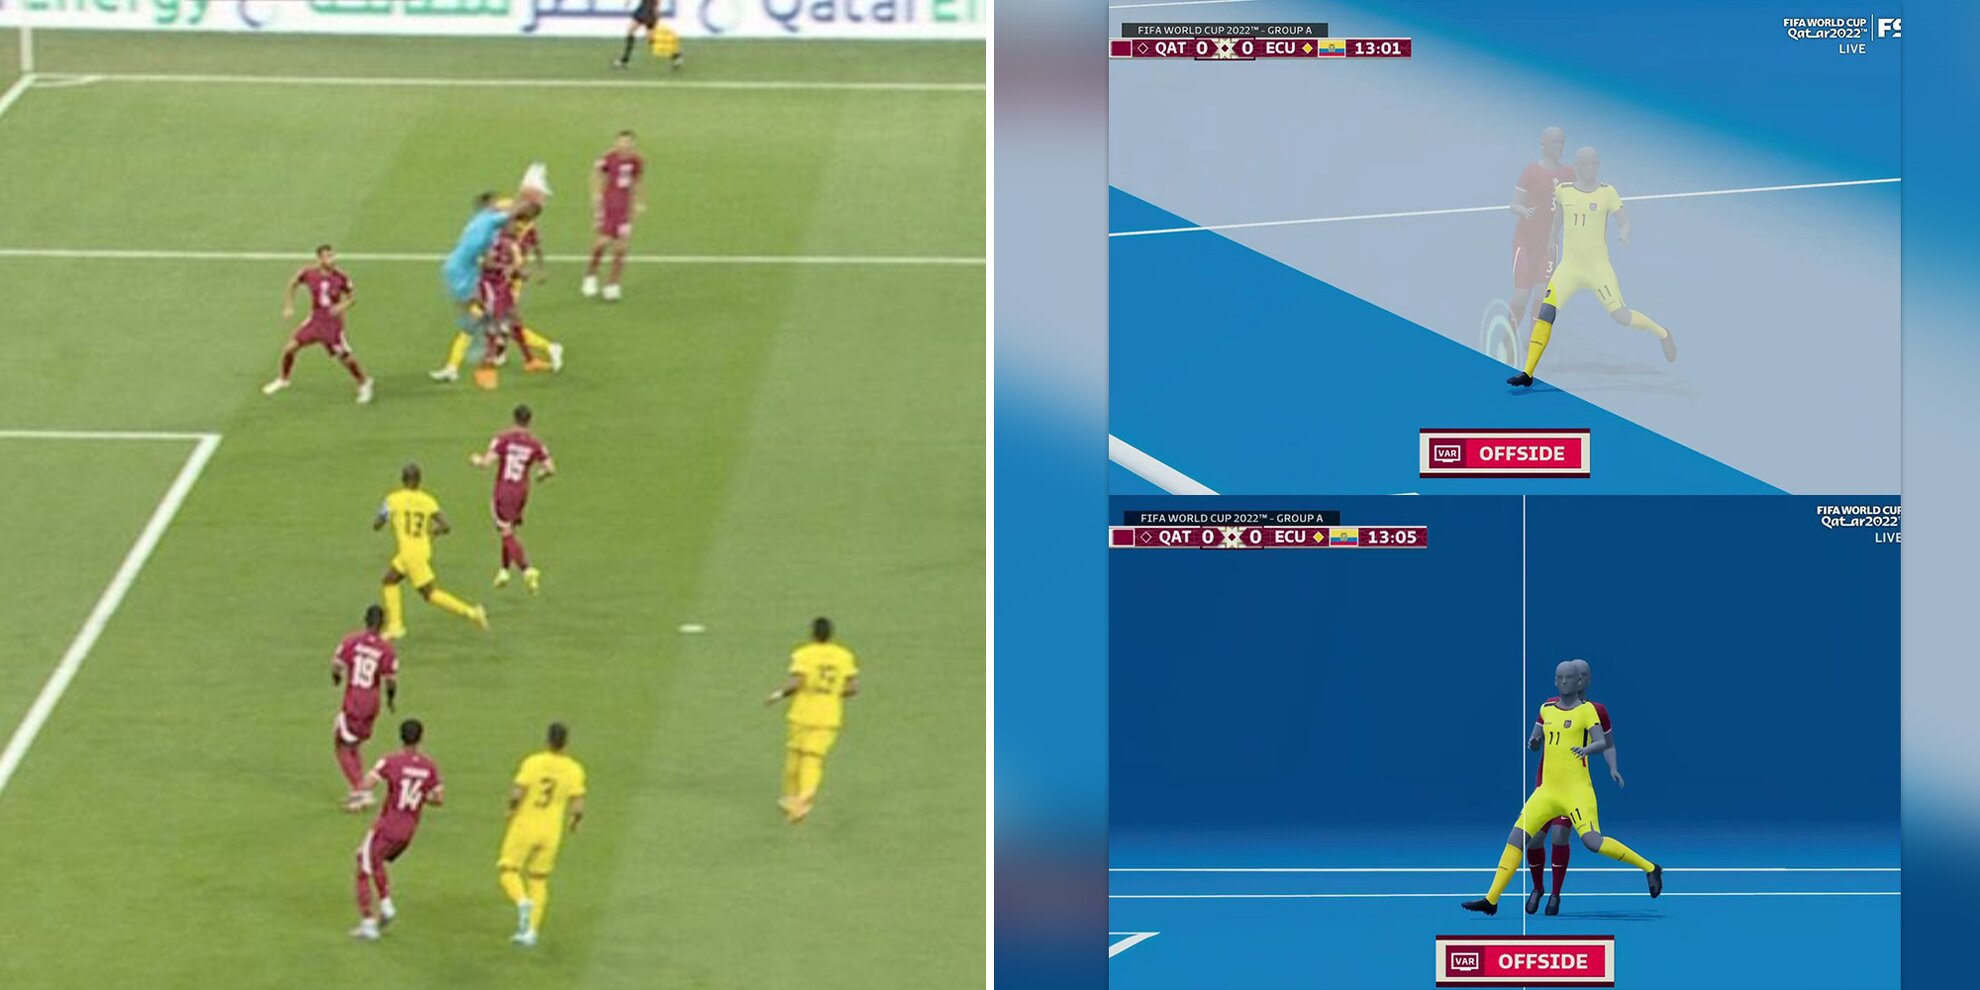 Explained: Why Enner Valencia goal was ruled offside by VAR in opening game of World Cup 2022